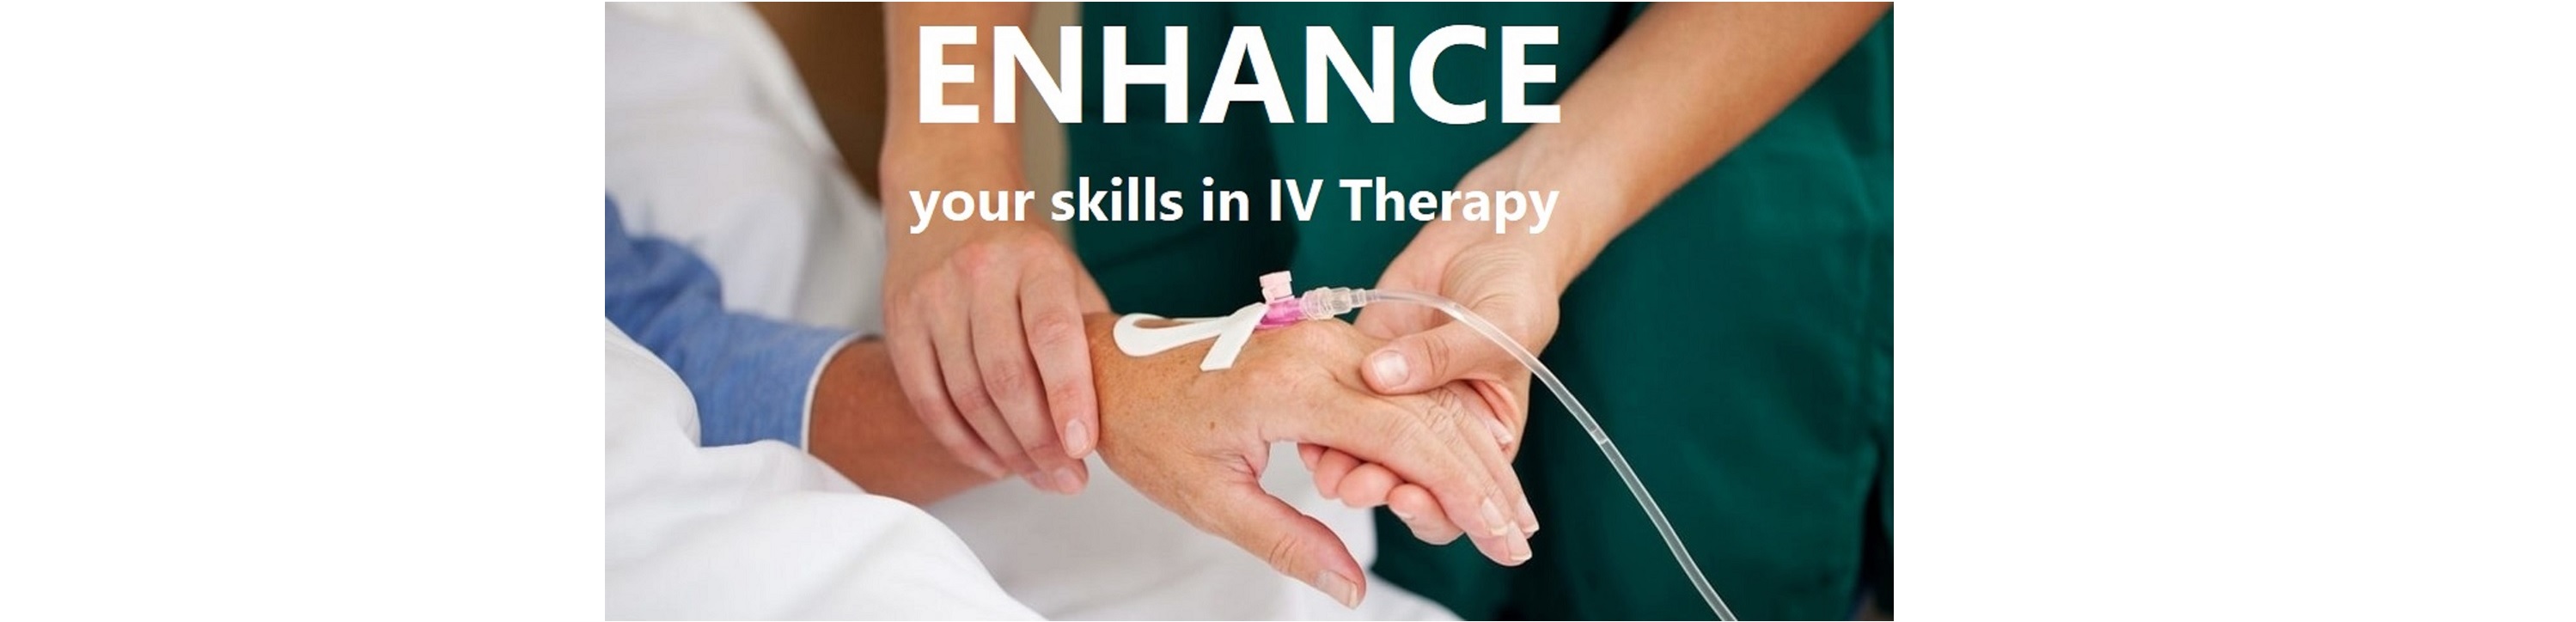 IV Therapy Training Course - January 2023 Banner